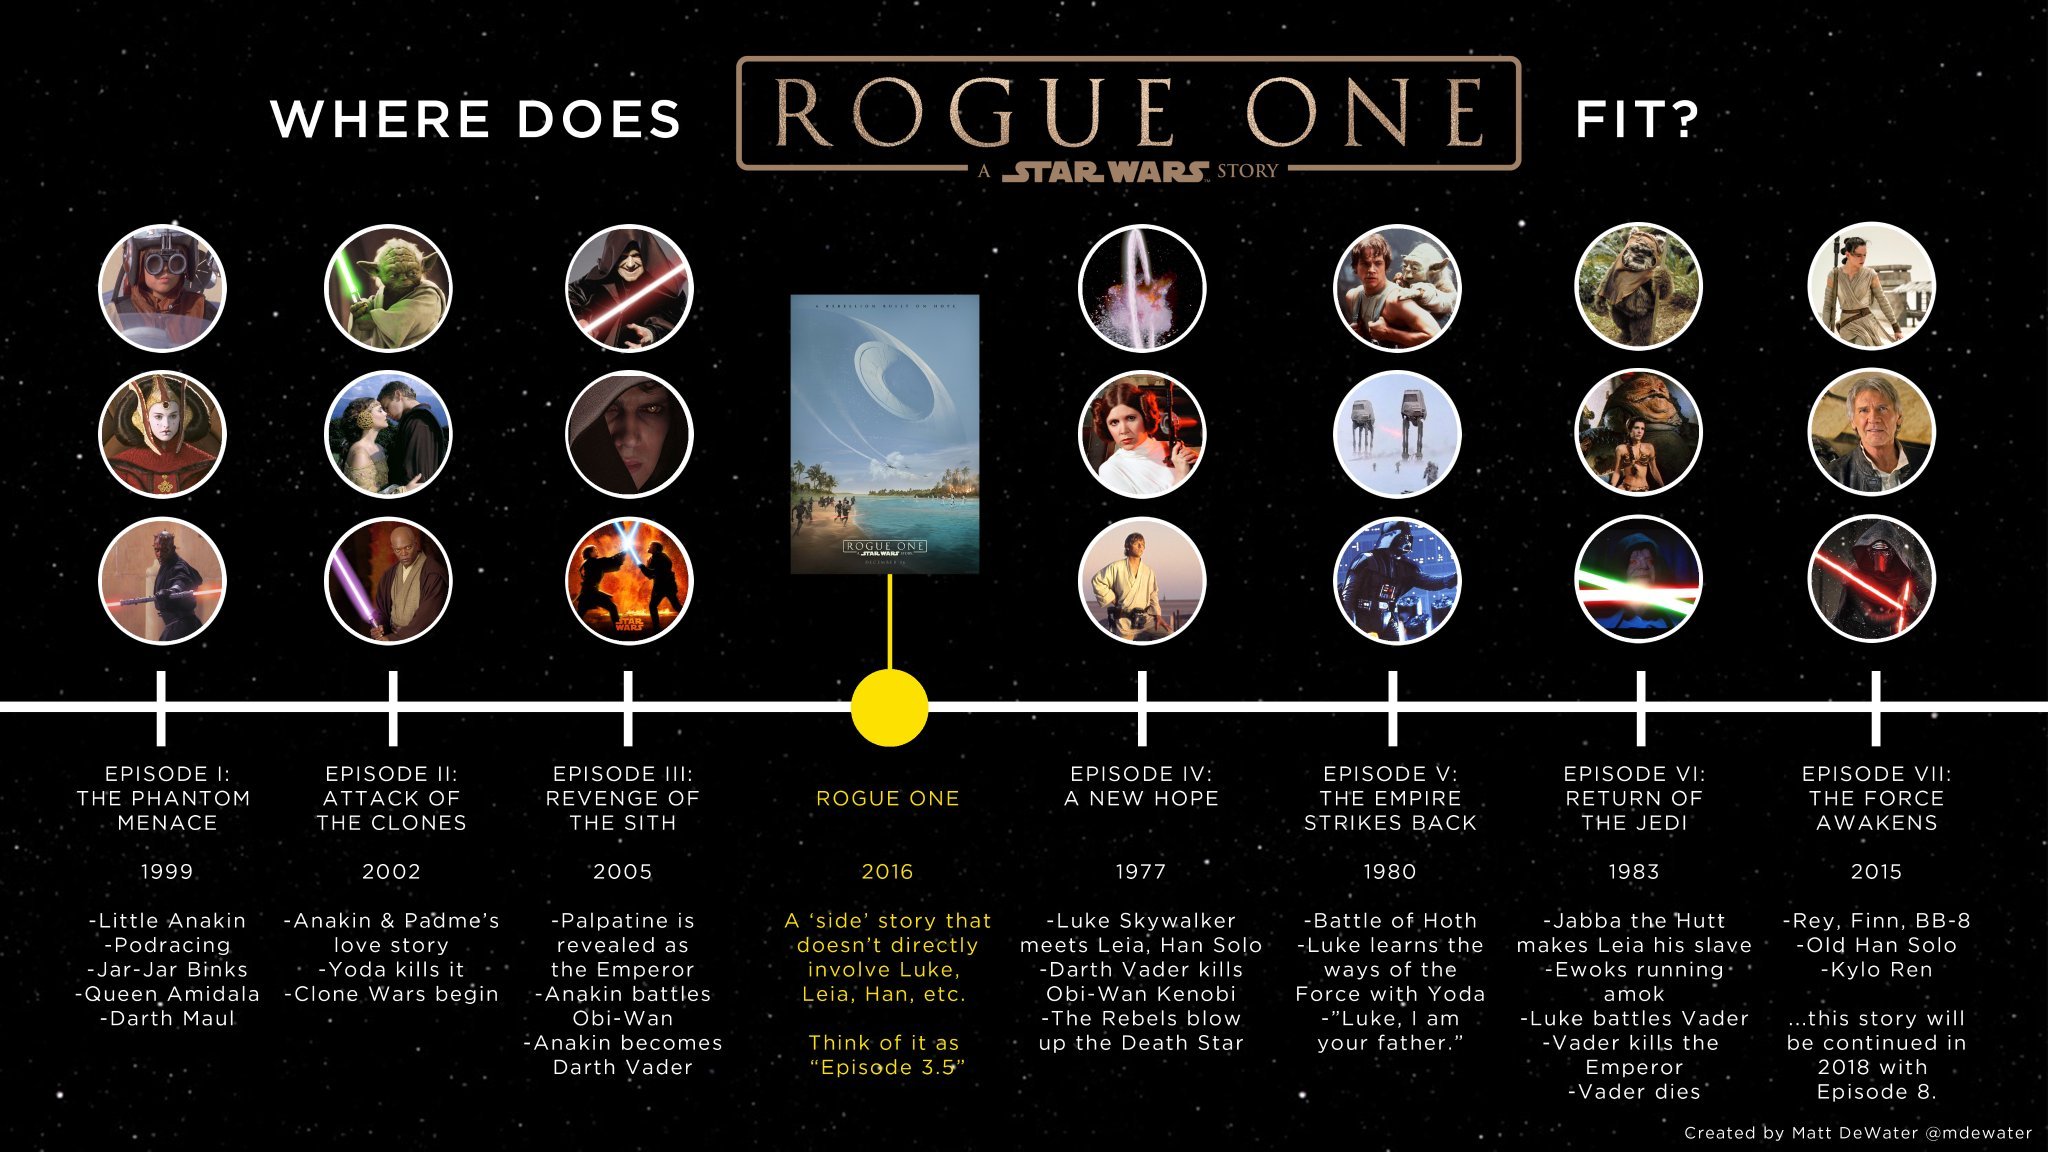 For those who need a Star Wars timeline refresher, Andor takes